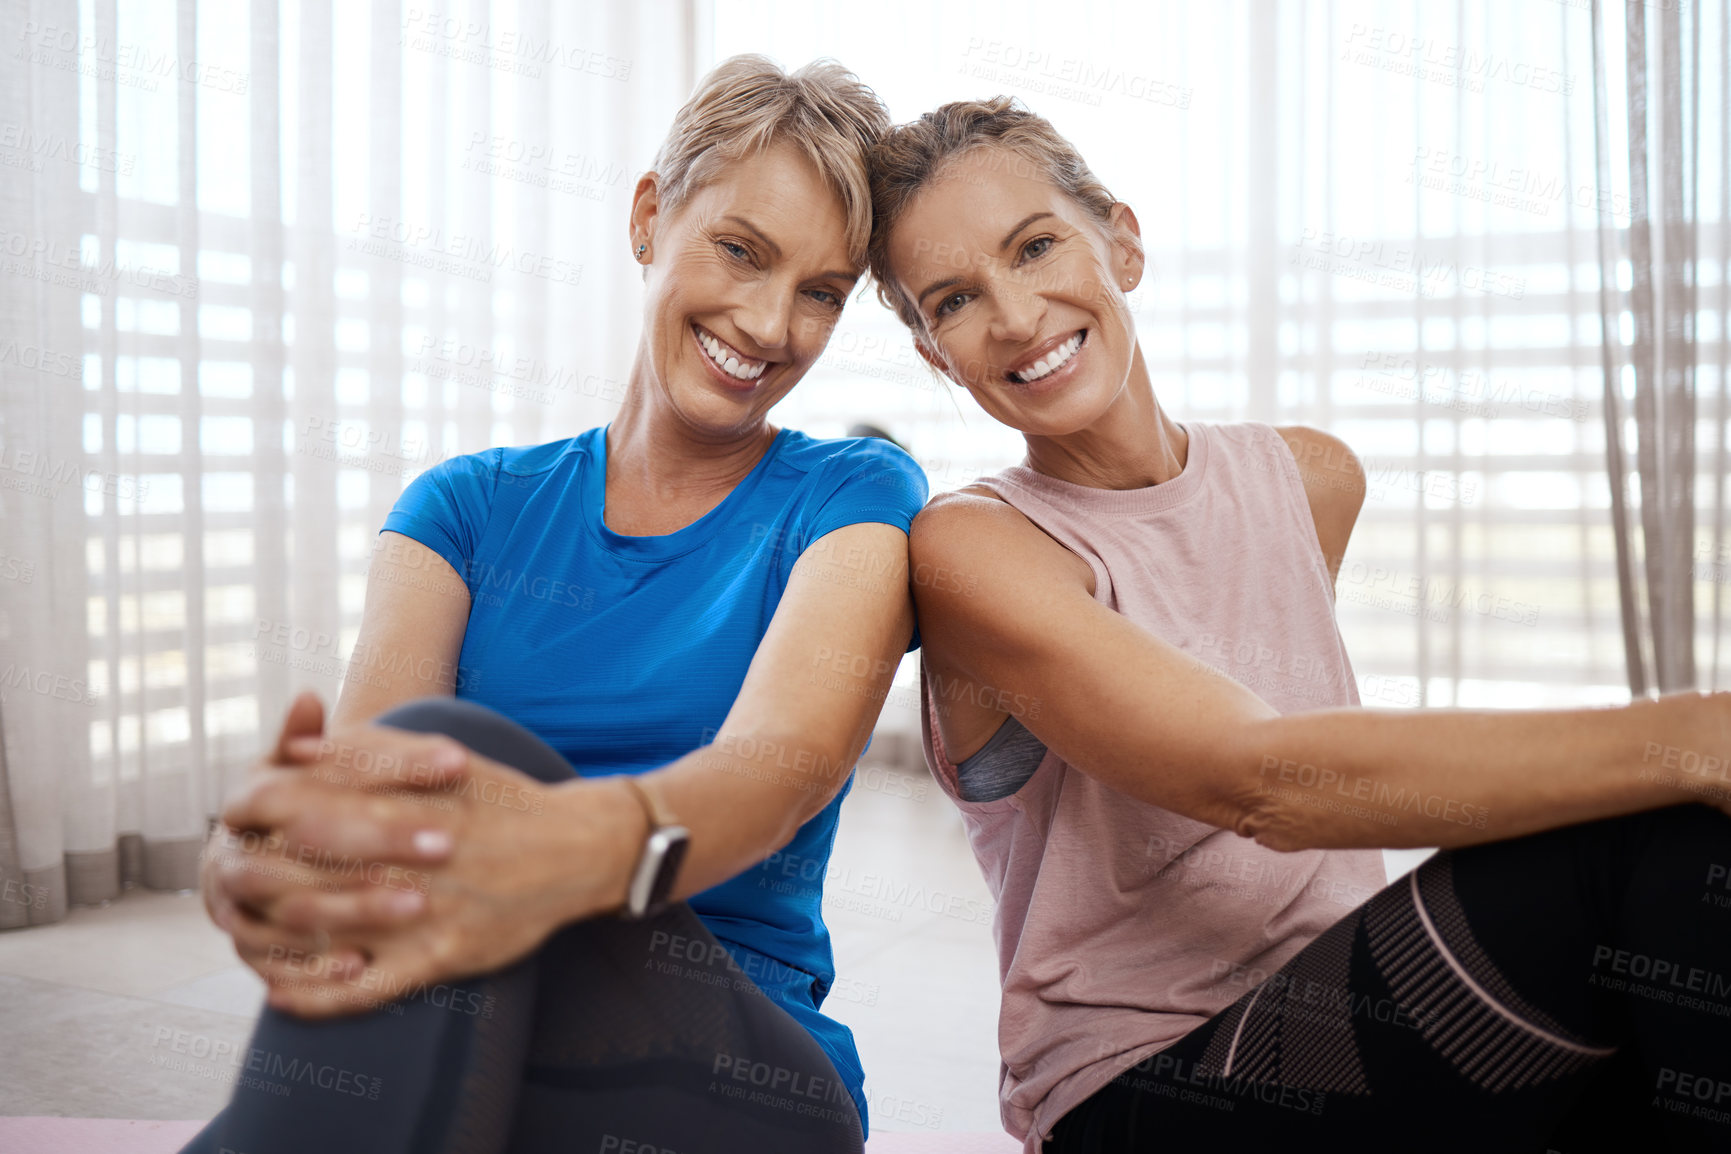 Buy stock photo Portrait of two women taking a break while exercising together at home